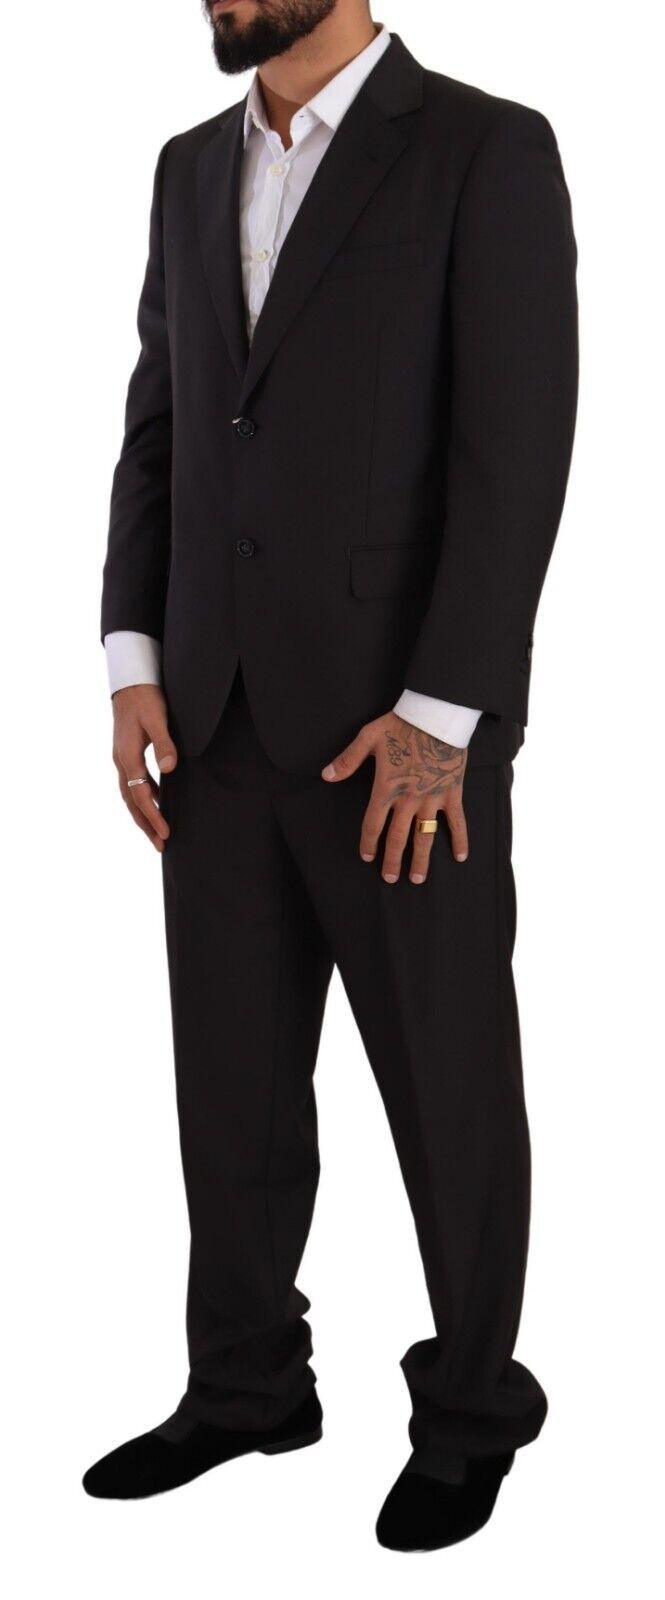 Domenico Tagliente Men's Dark Gray Single Breasted Formal Suit - Designed by Domenico Tagliente Available to Buy at a Discounted Price on Moon Behind The Hill Online Designer Discount Store